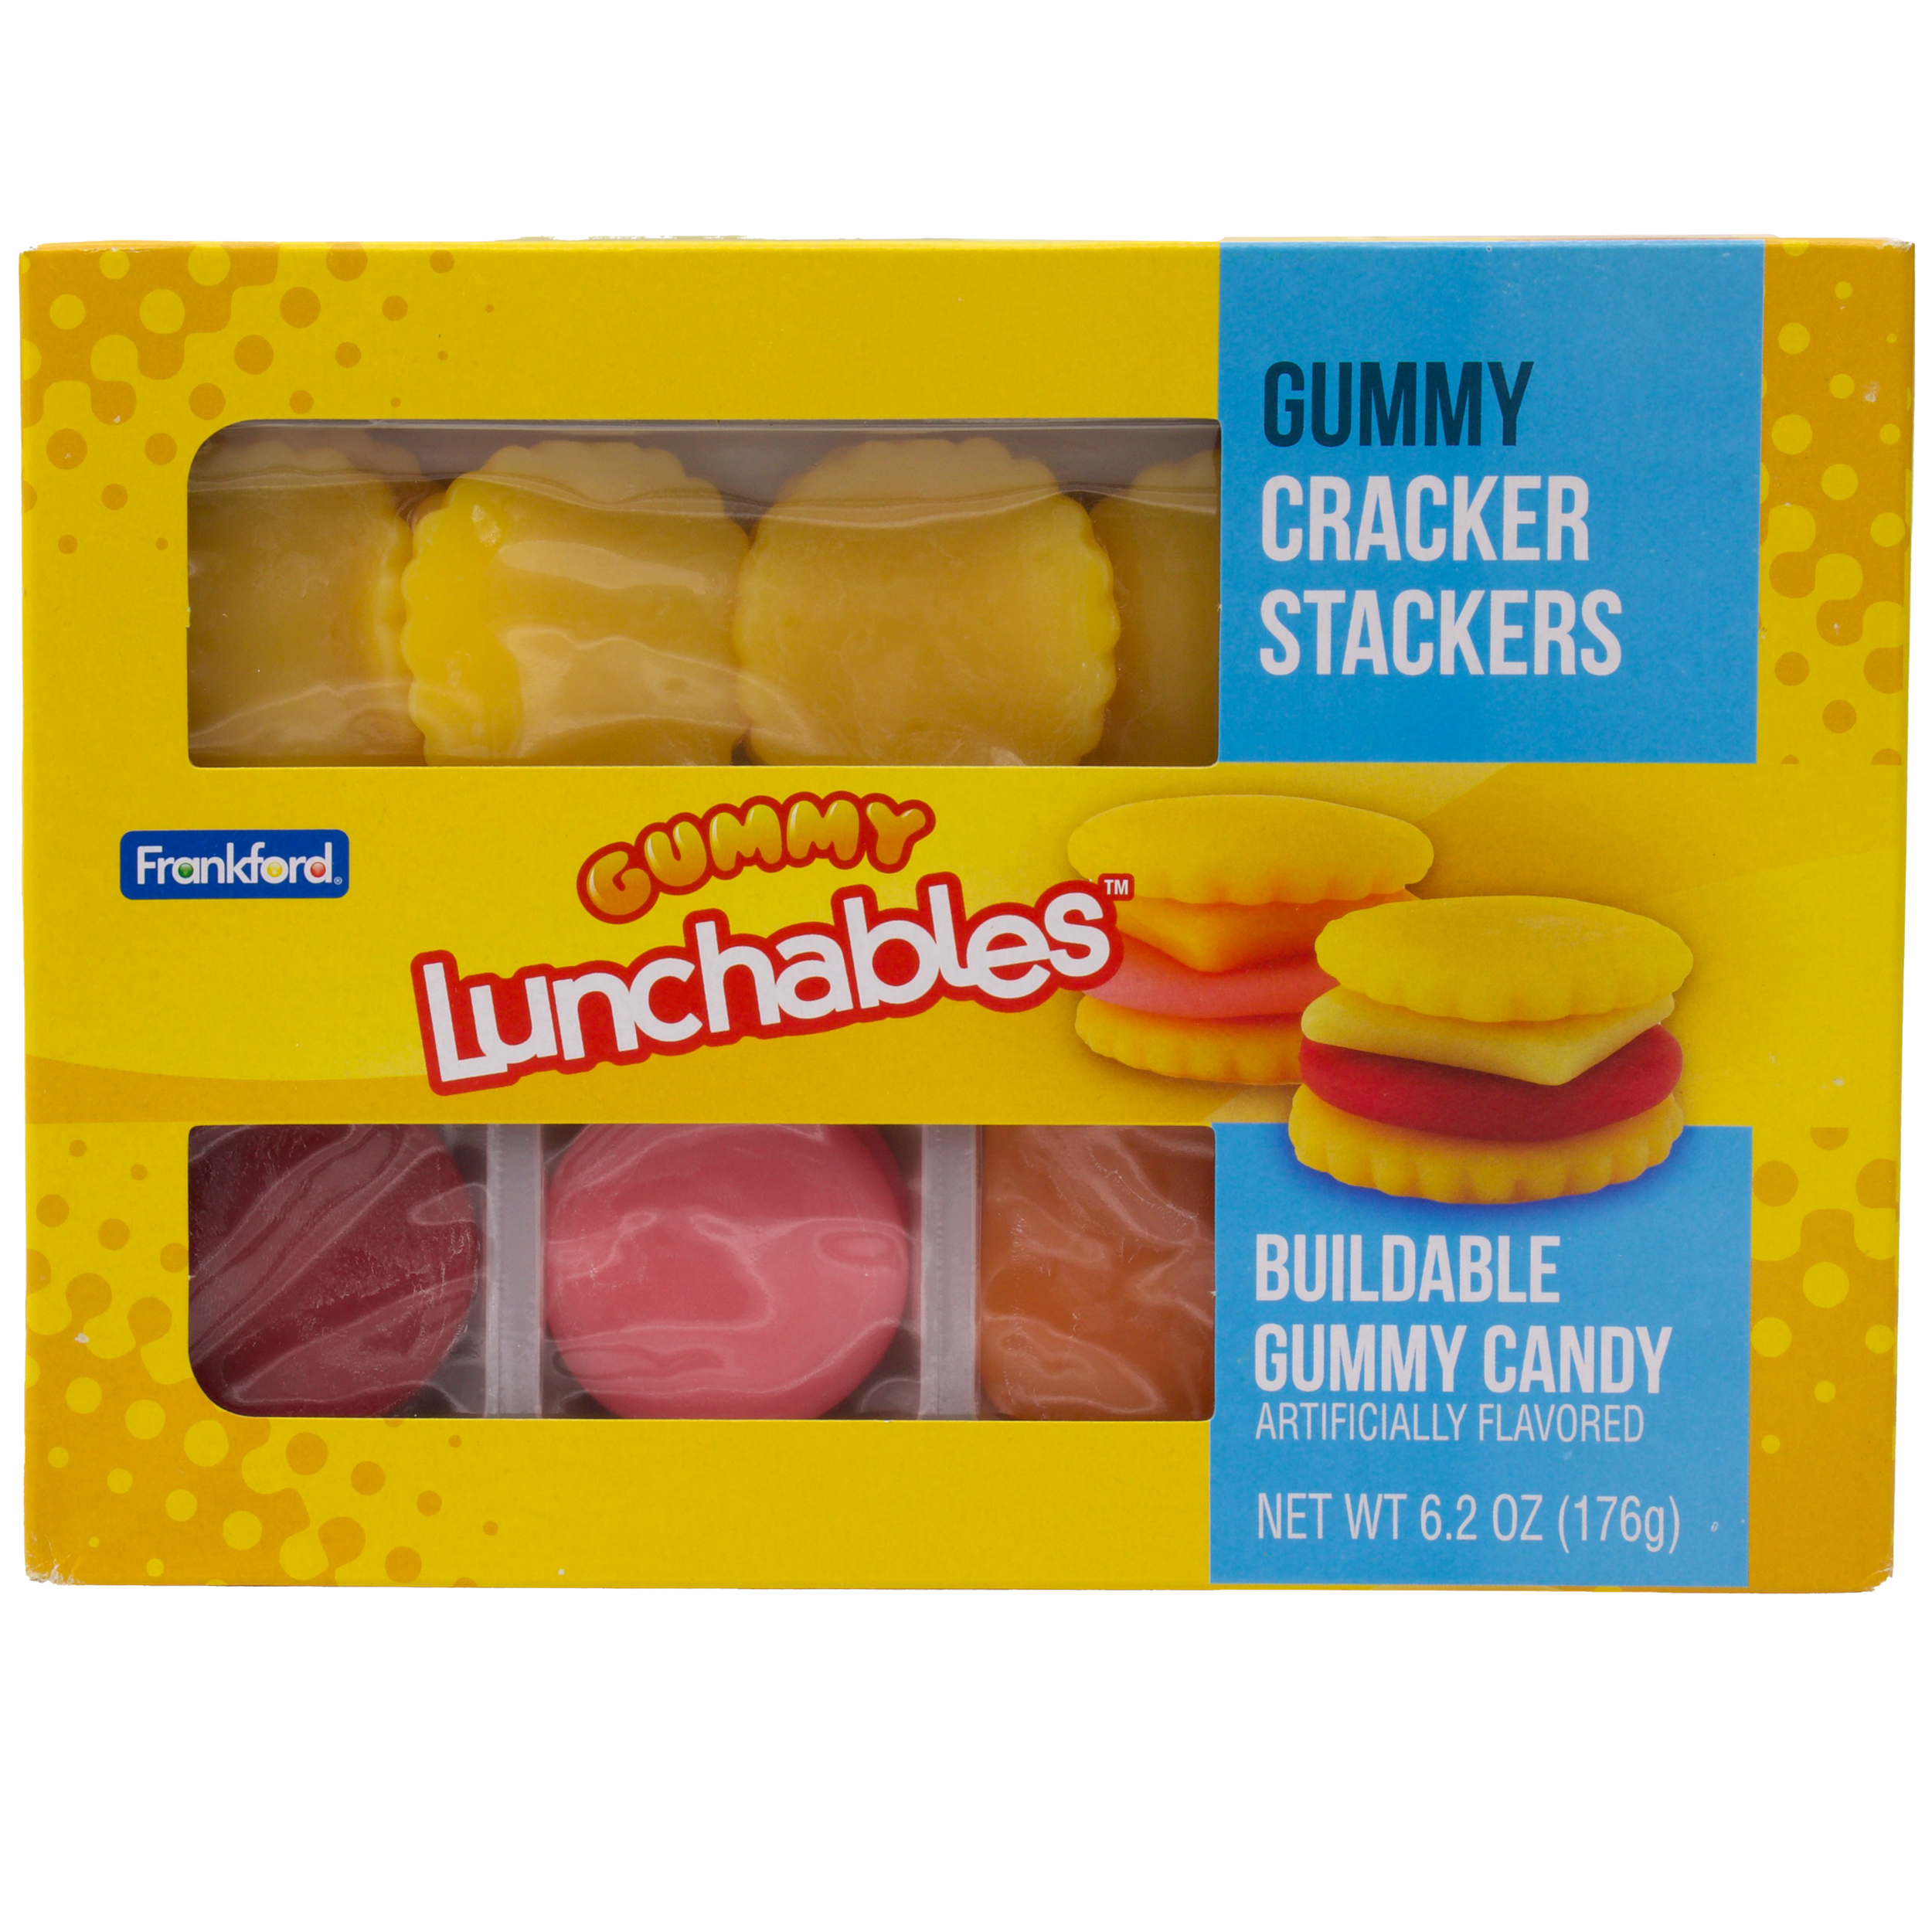 Frankford Kraft Lunchables Cracker Stacker Gummy Candy, Snack Pack 6.2 Ounces - image 1 of 6